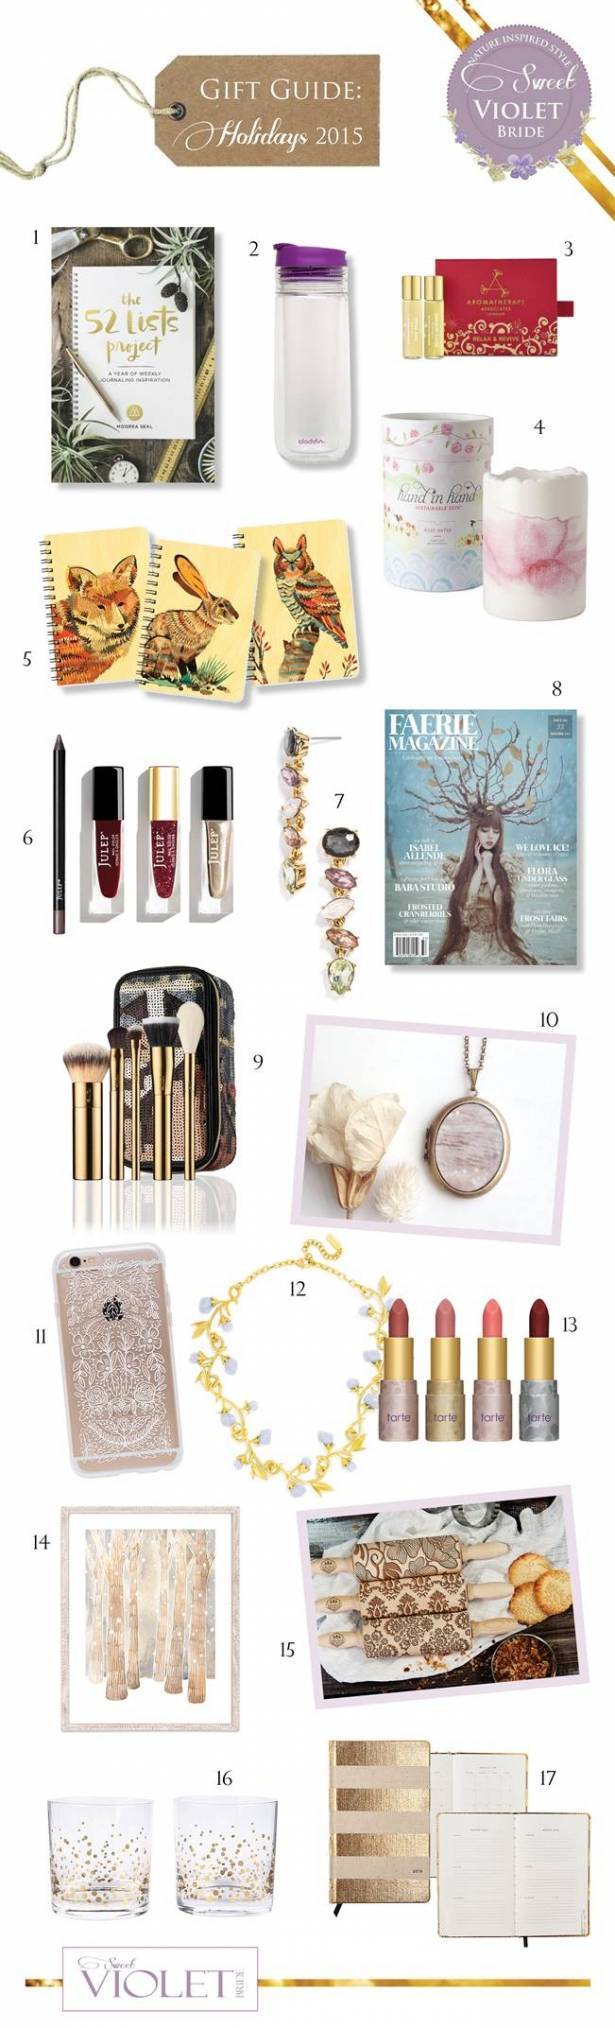 Favorite Things: Holiday Gift Guide 2015 49